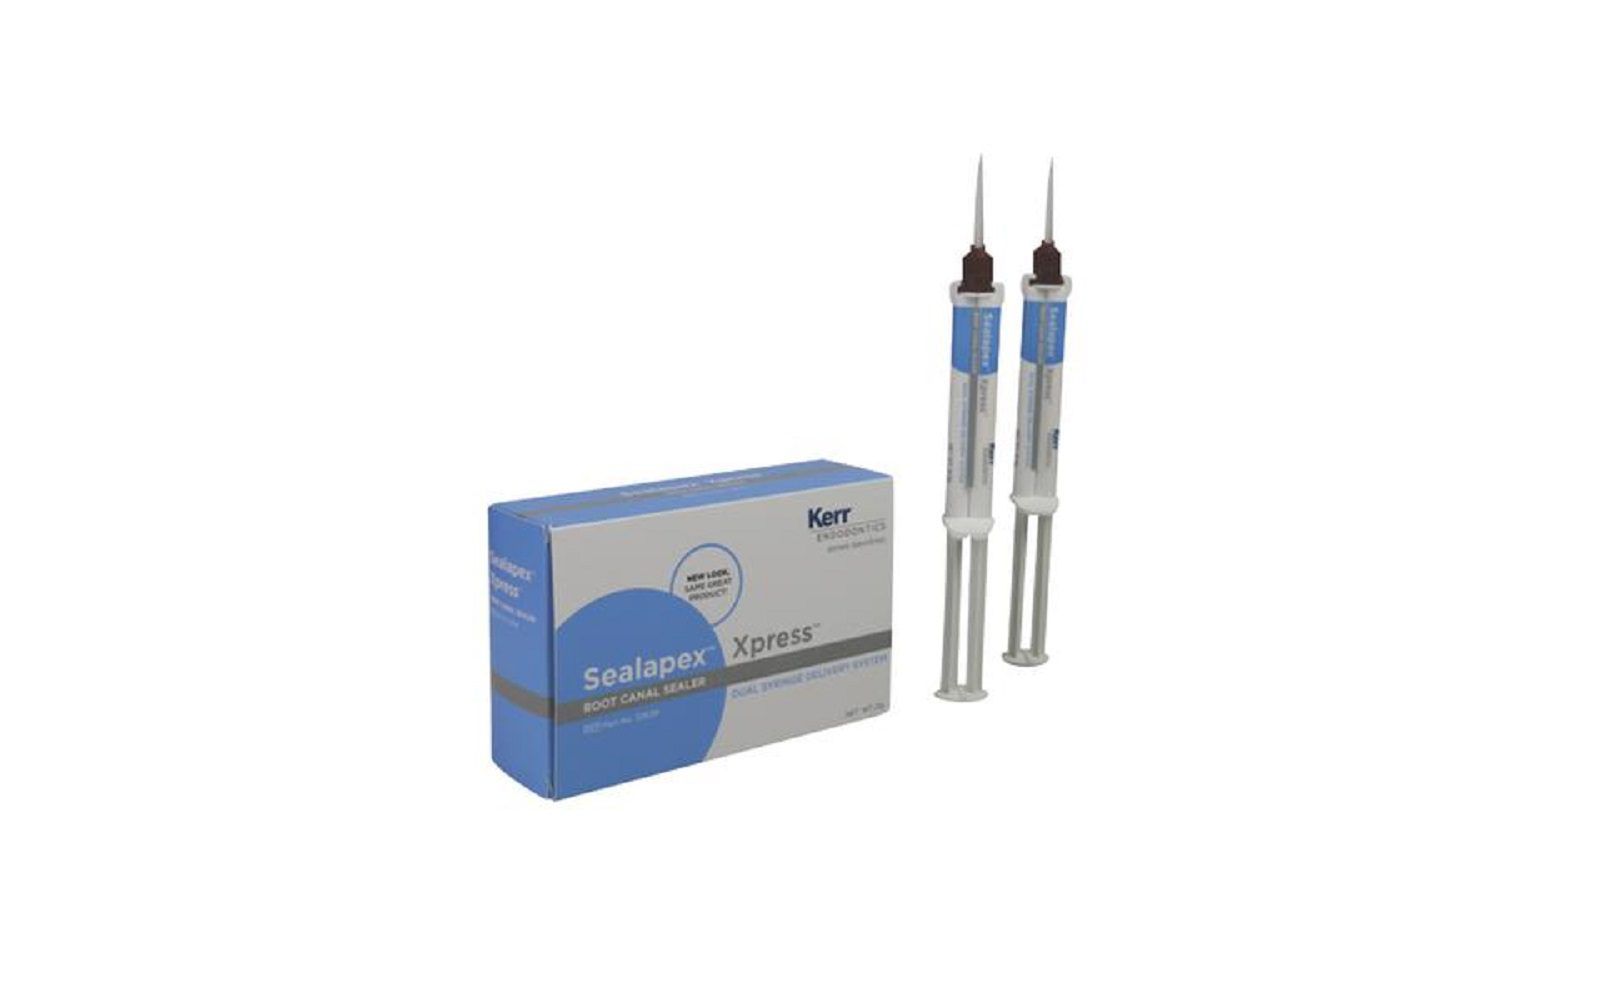 Sealapex™ xpress root canal sealer, dual syringe delivery system